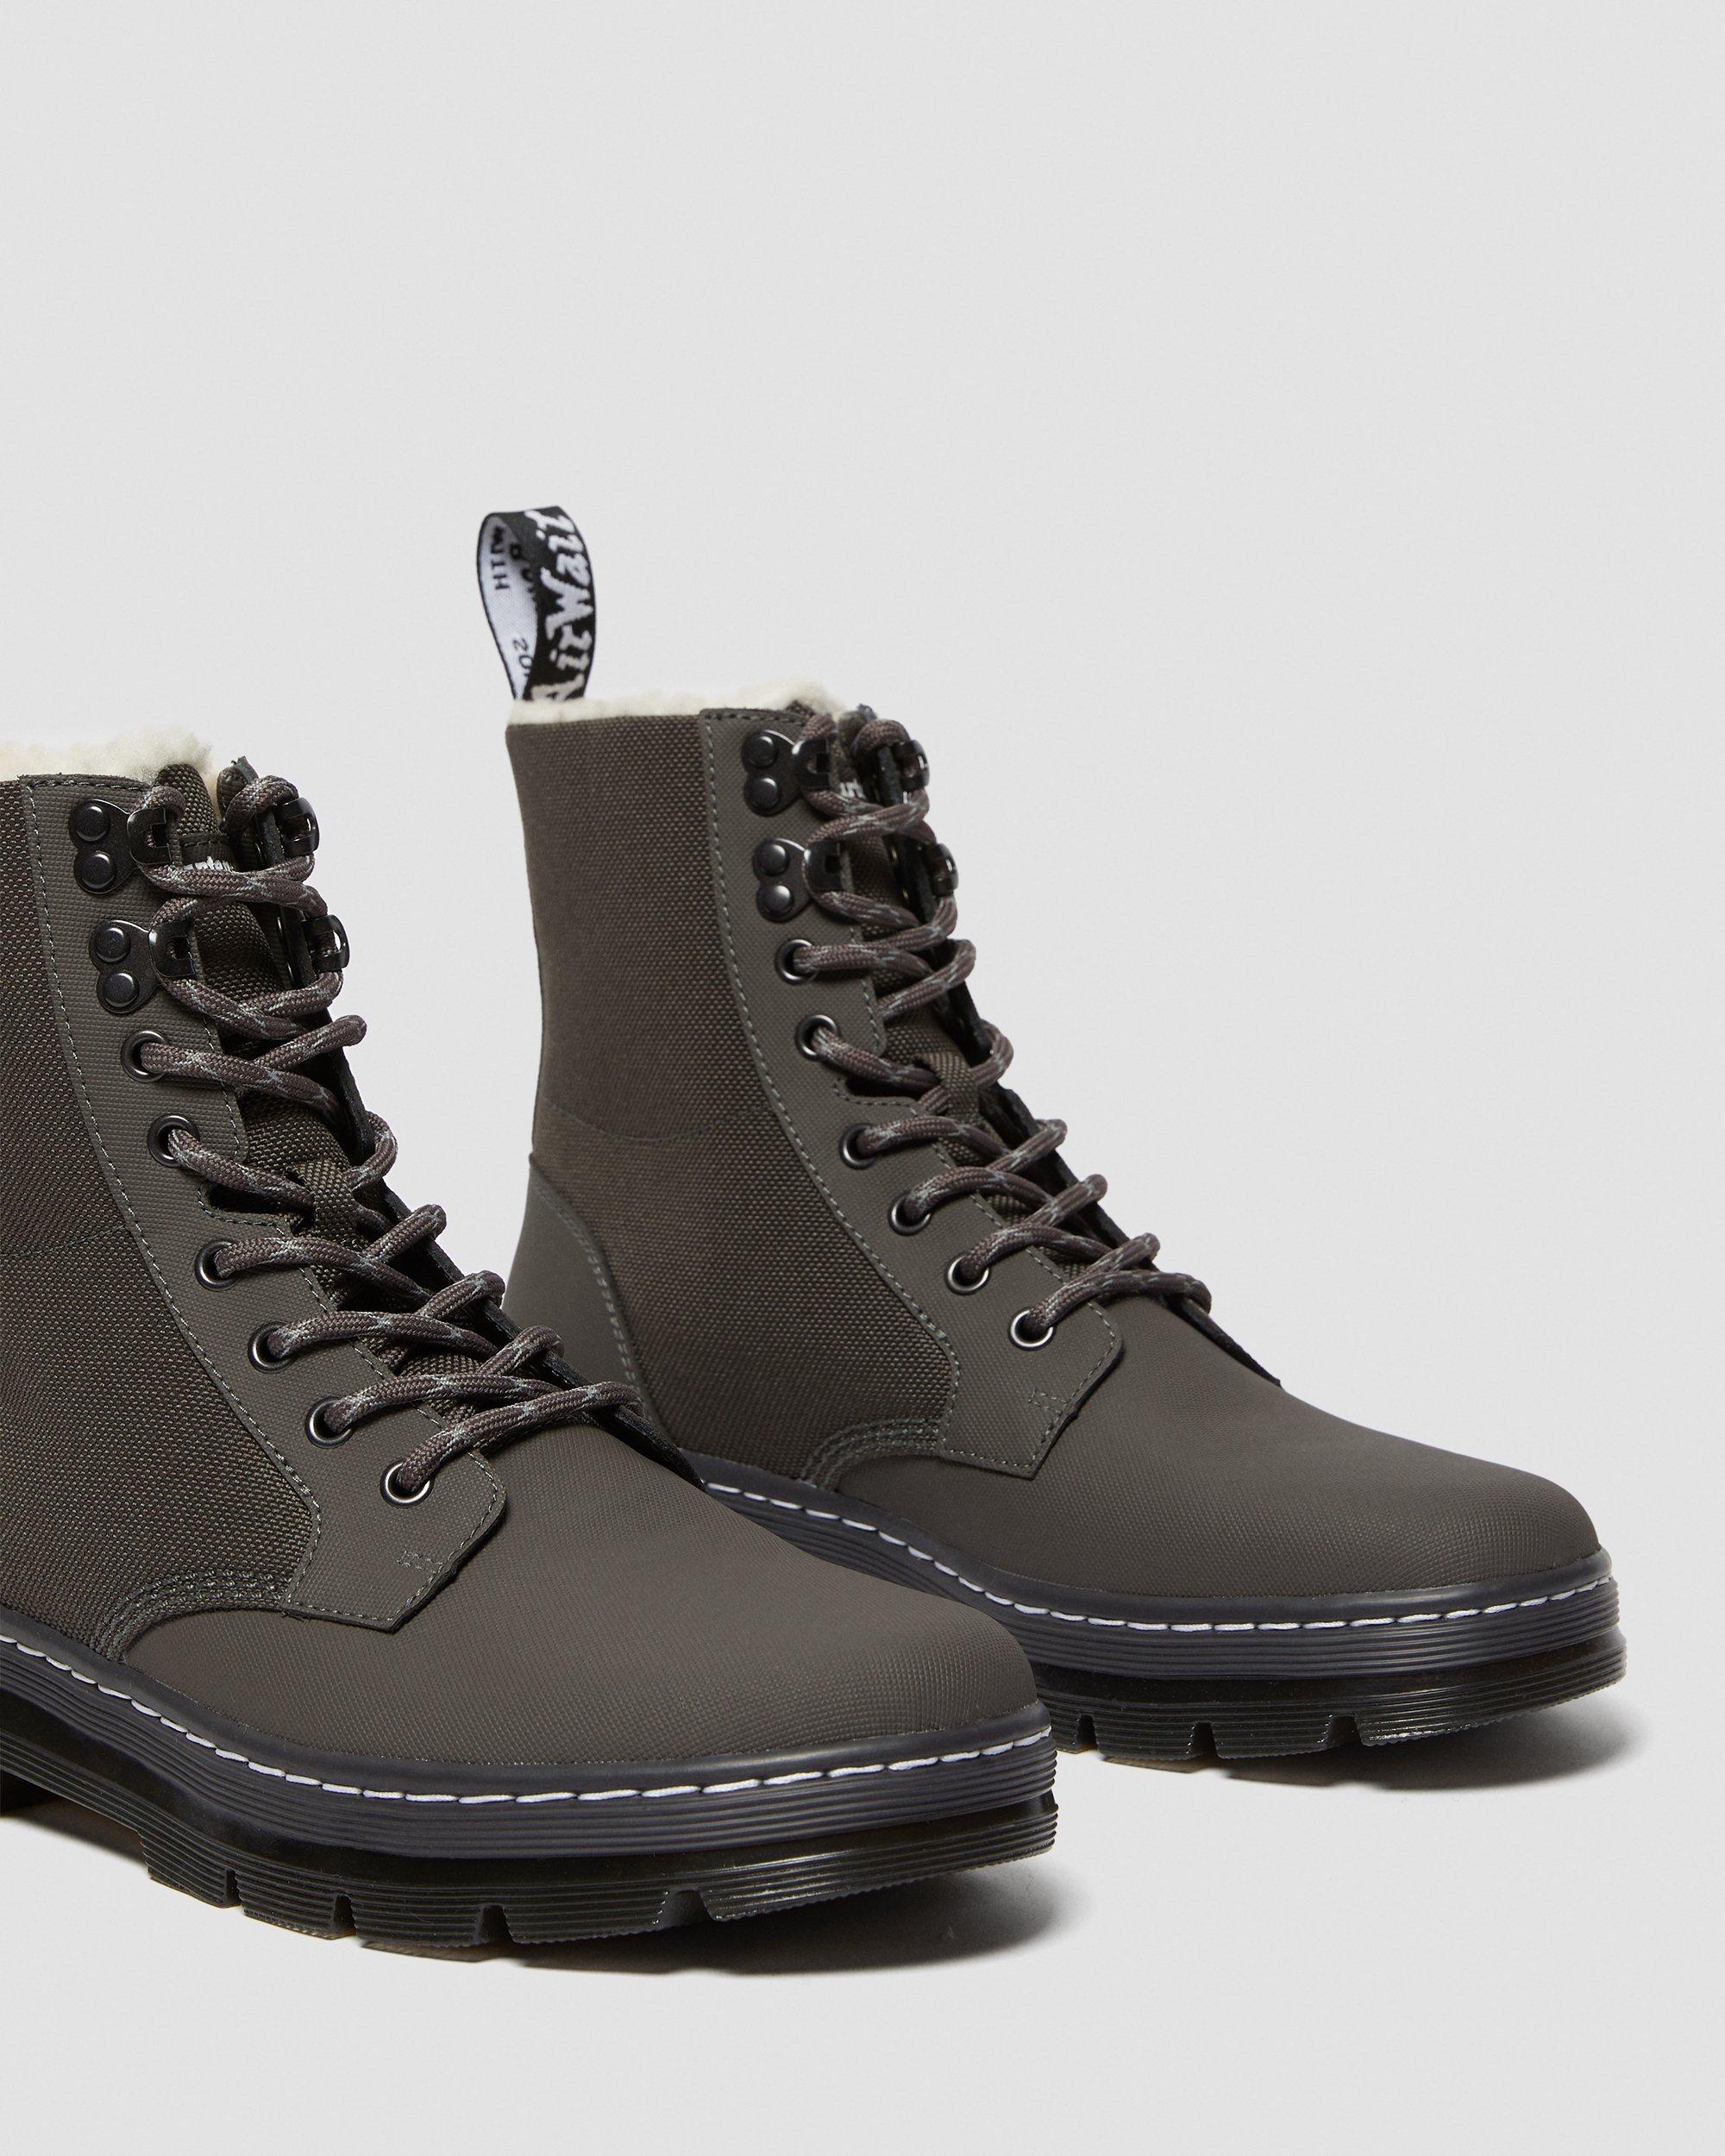 COMBS FLEECE LINED CASUAL BOOTS | Dr 